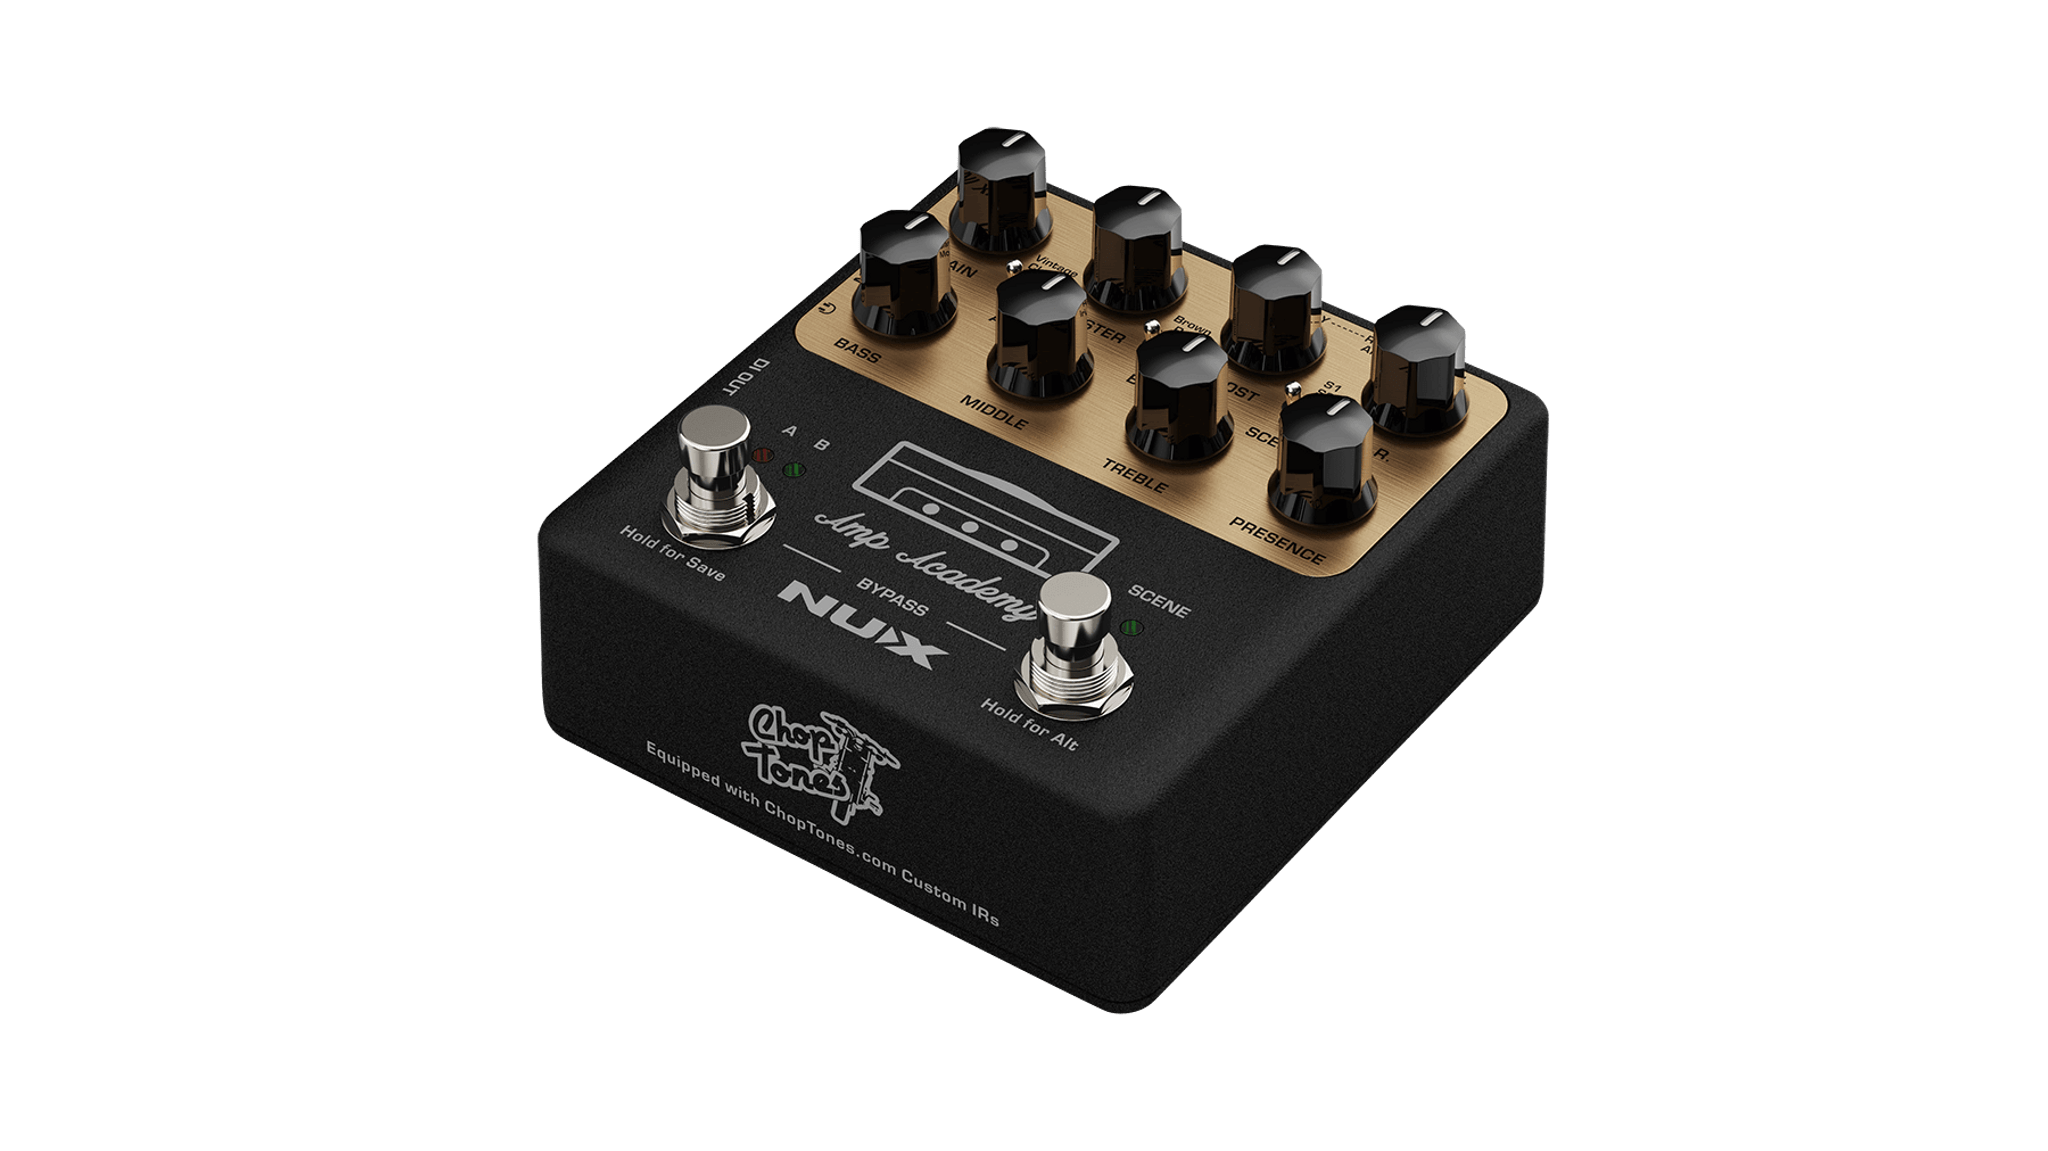 NUX Amp Academy Amp Modeling Stompbox at No Limit Guitar Co